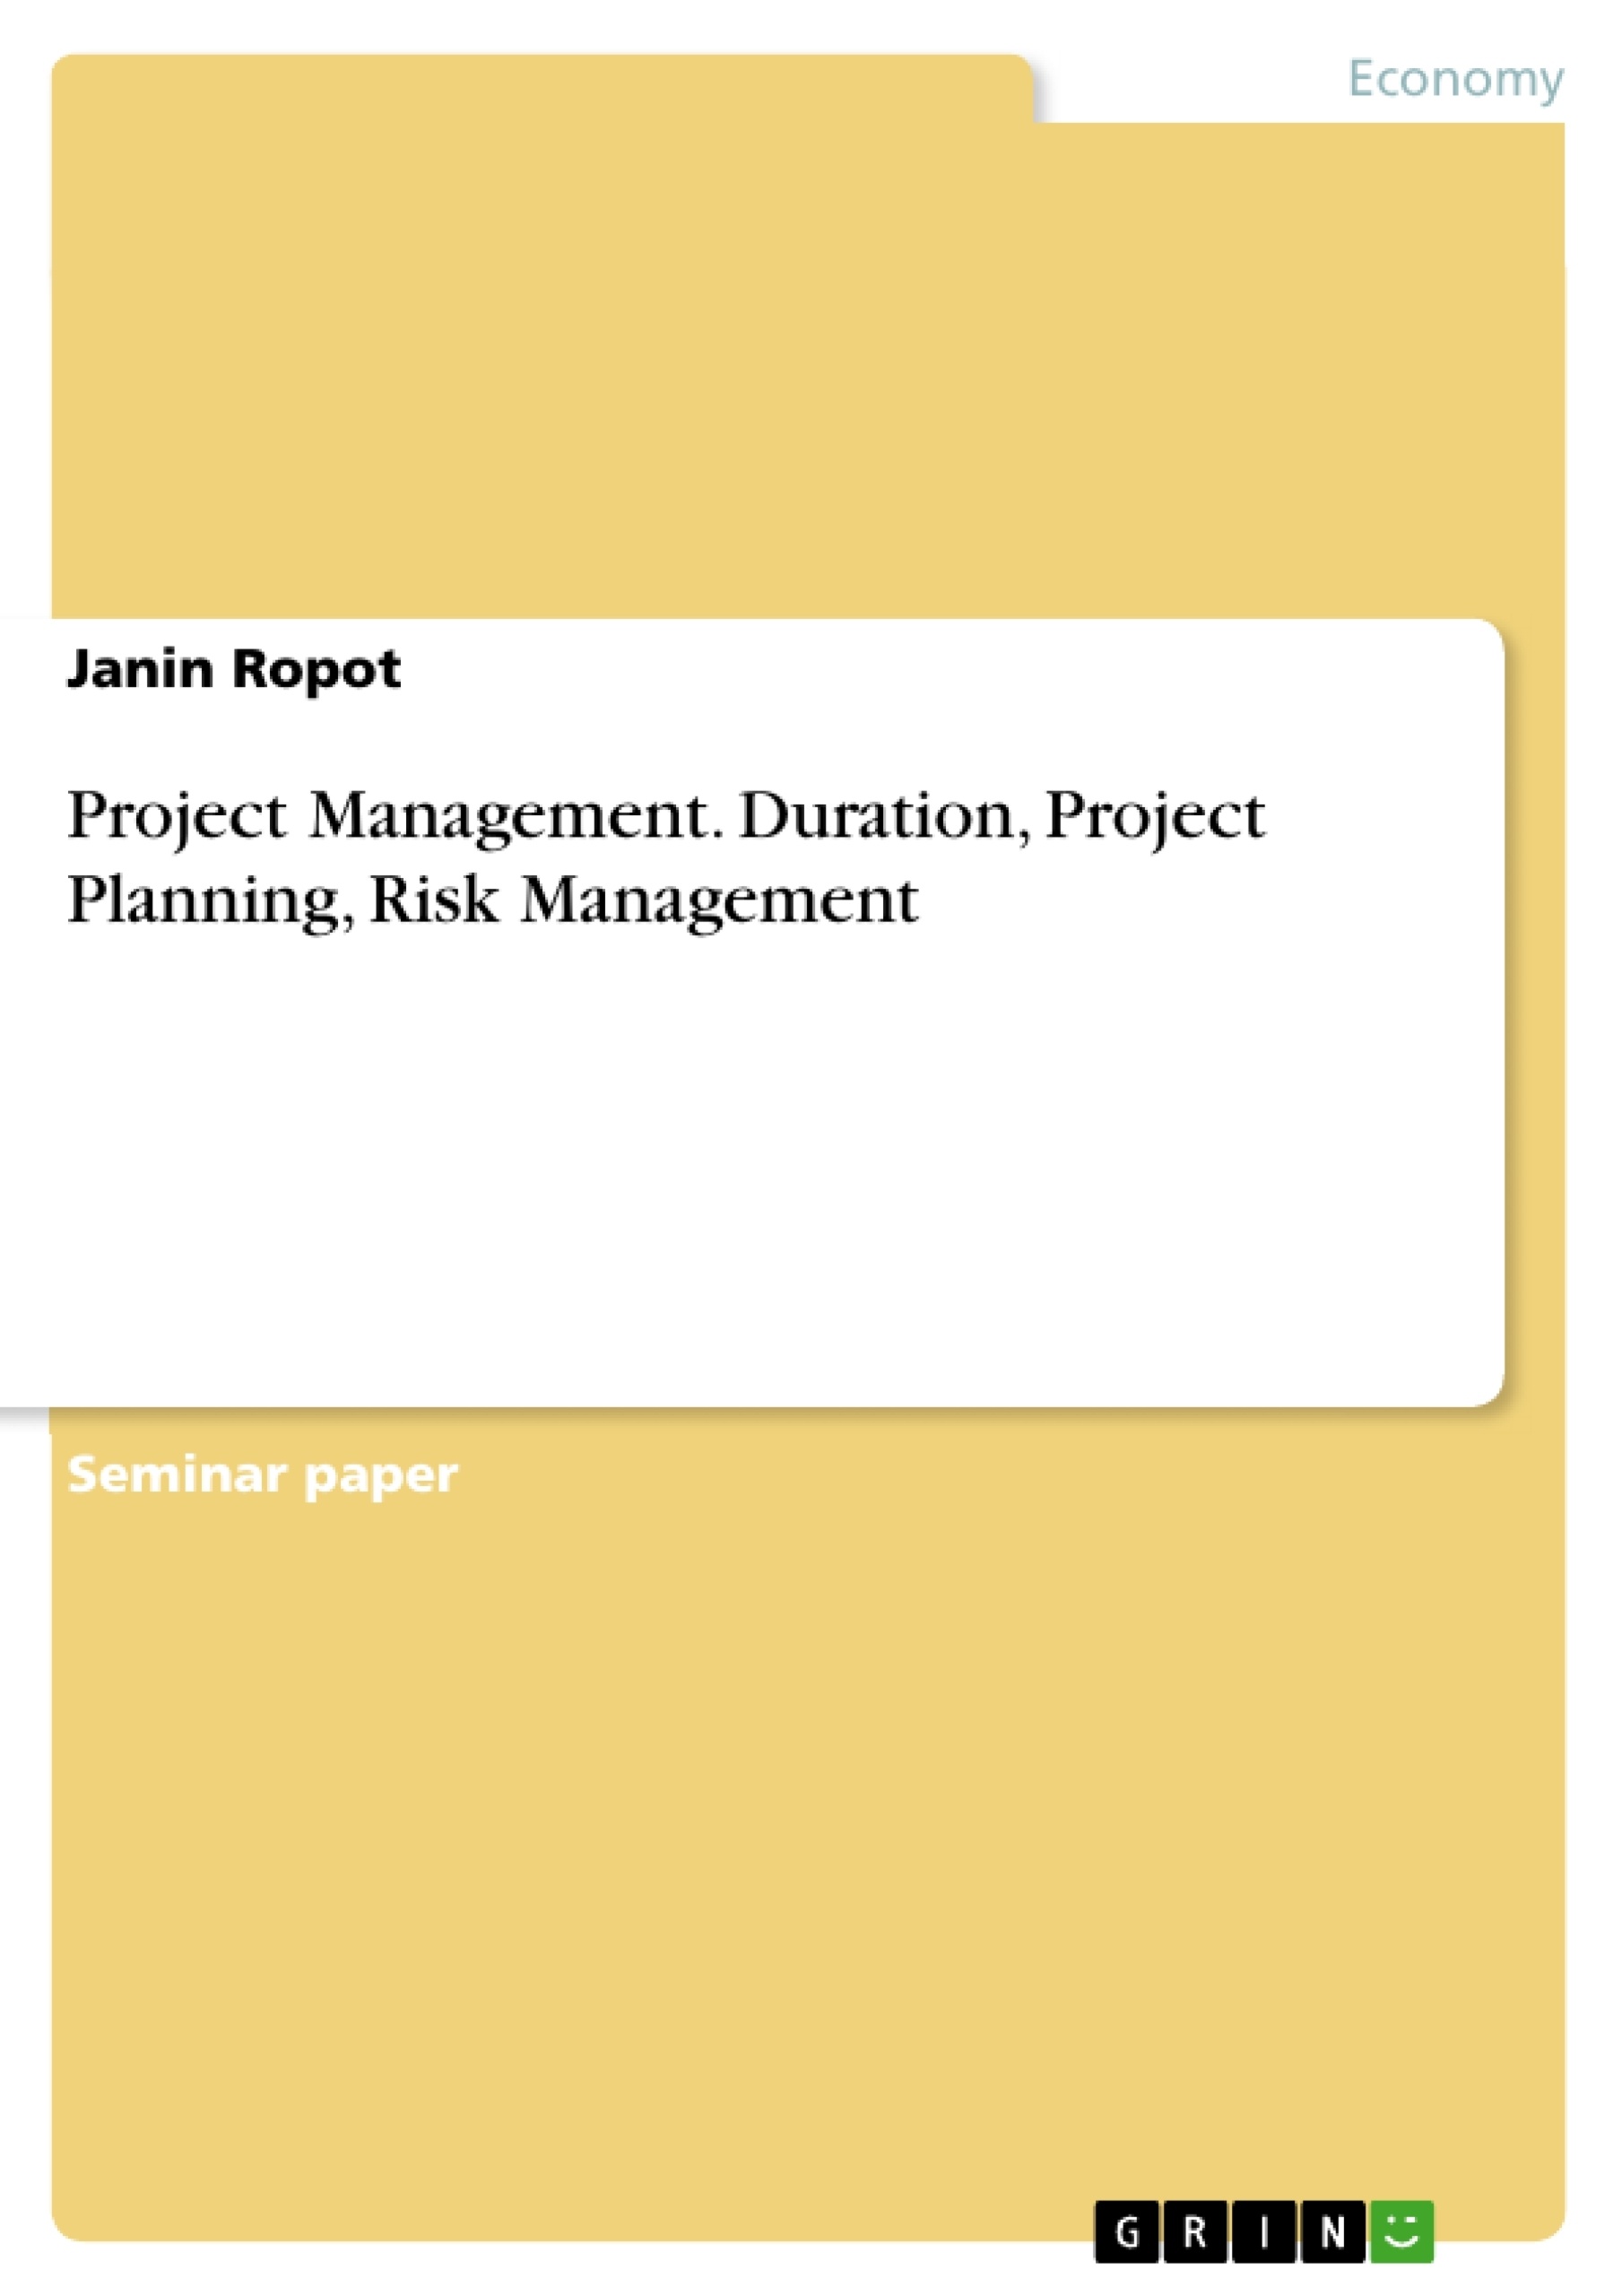 Project description master thesis on risk